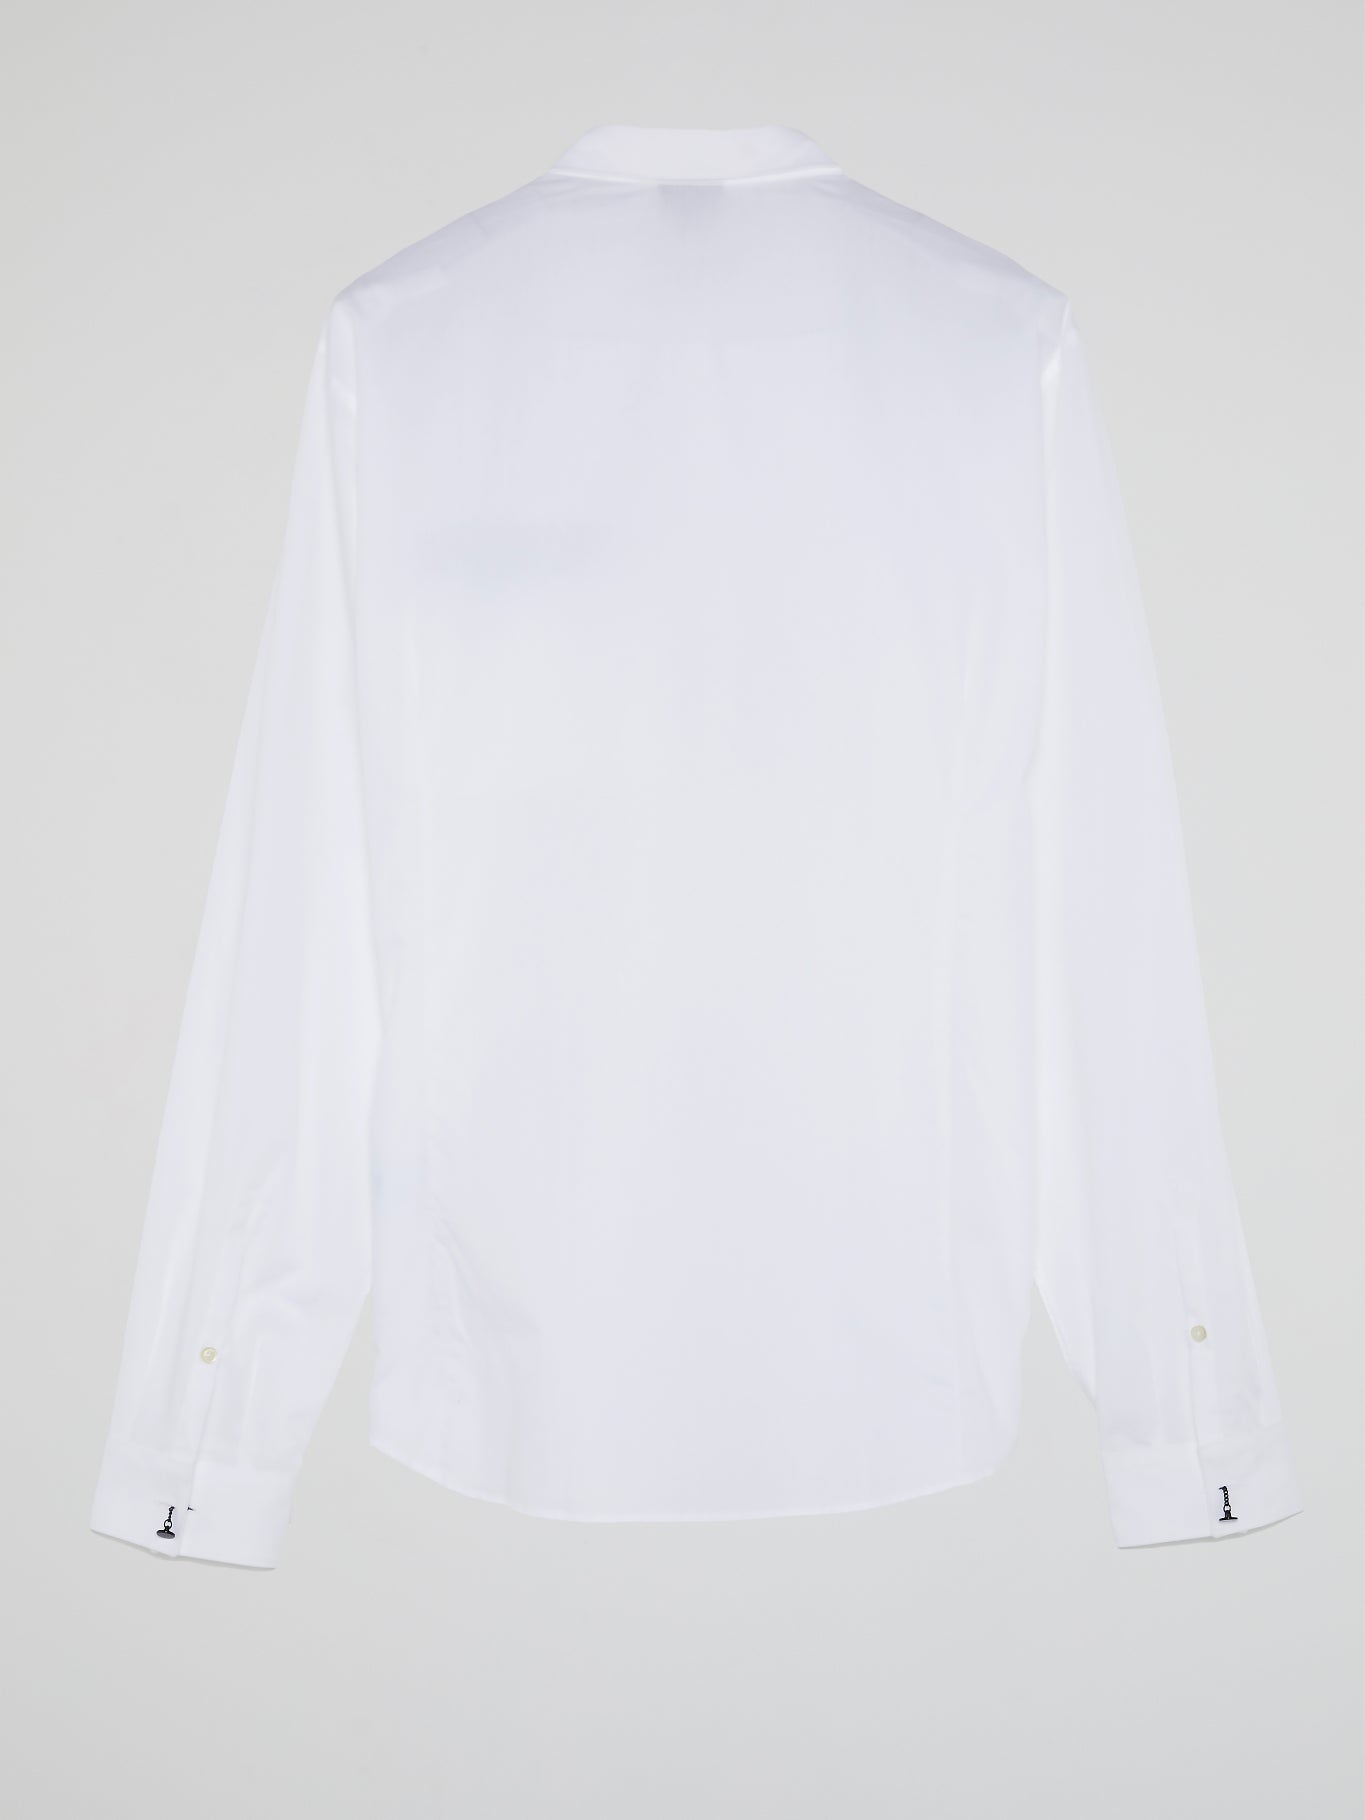 White Classic Button Up Shirt